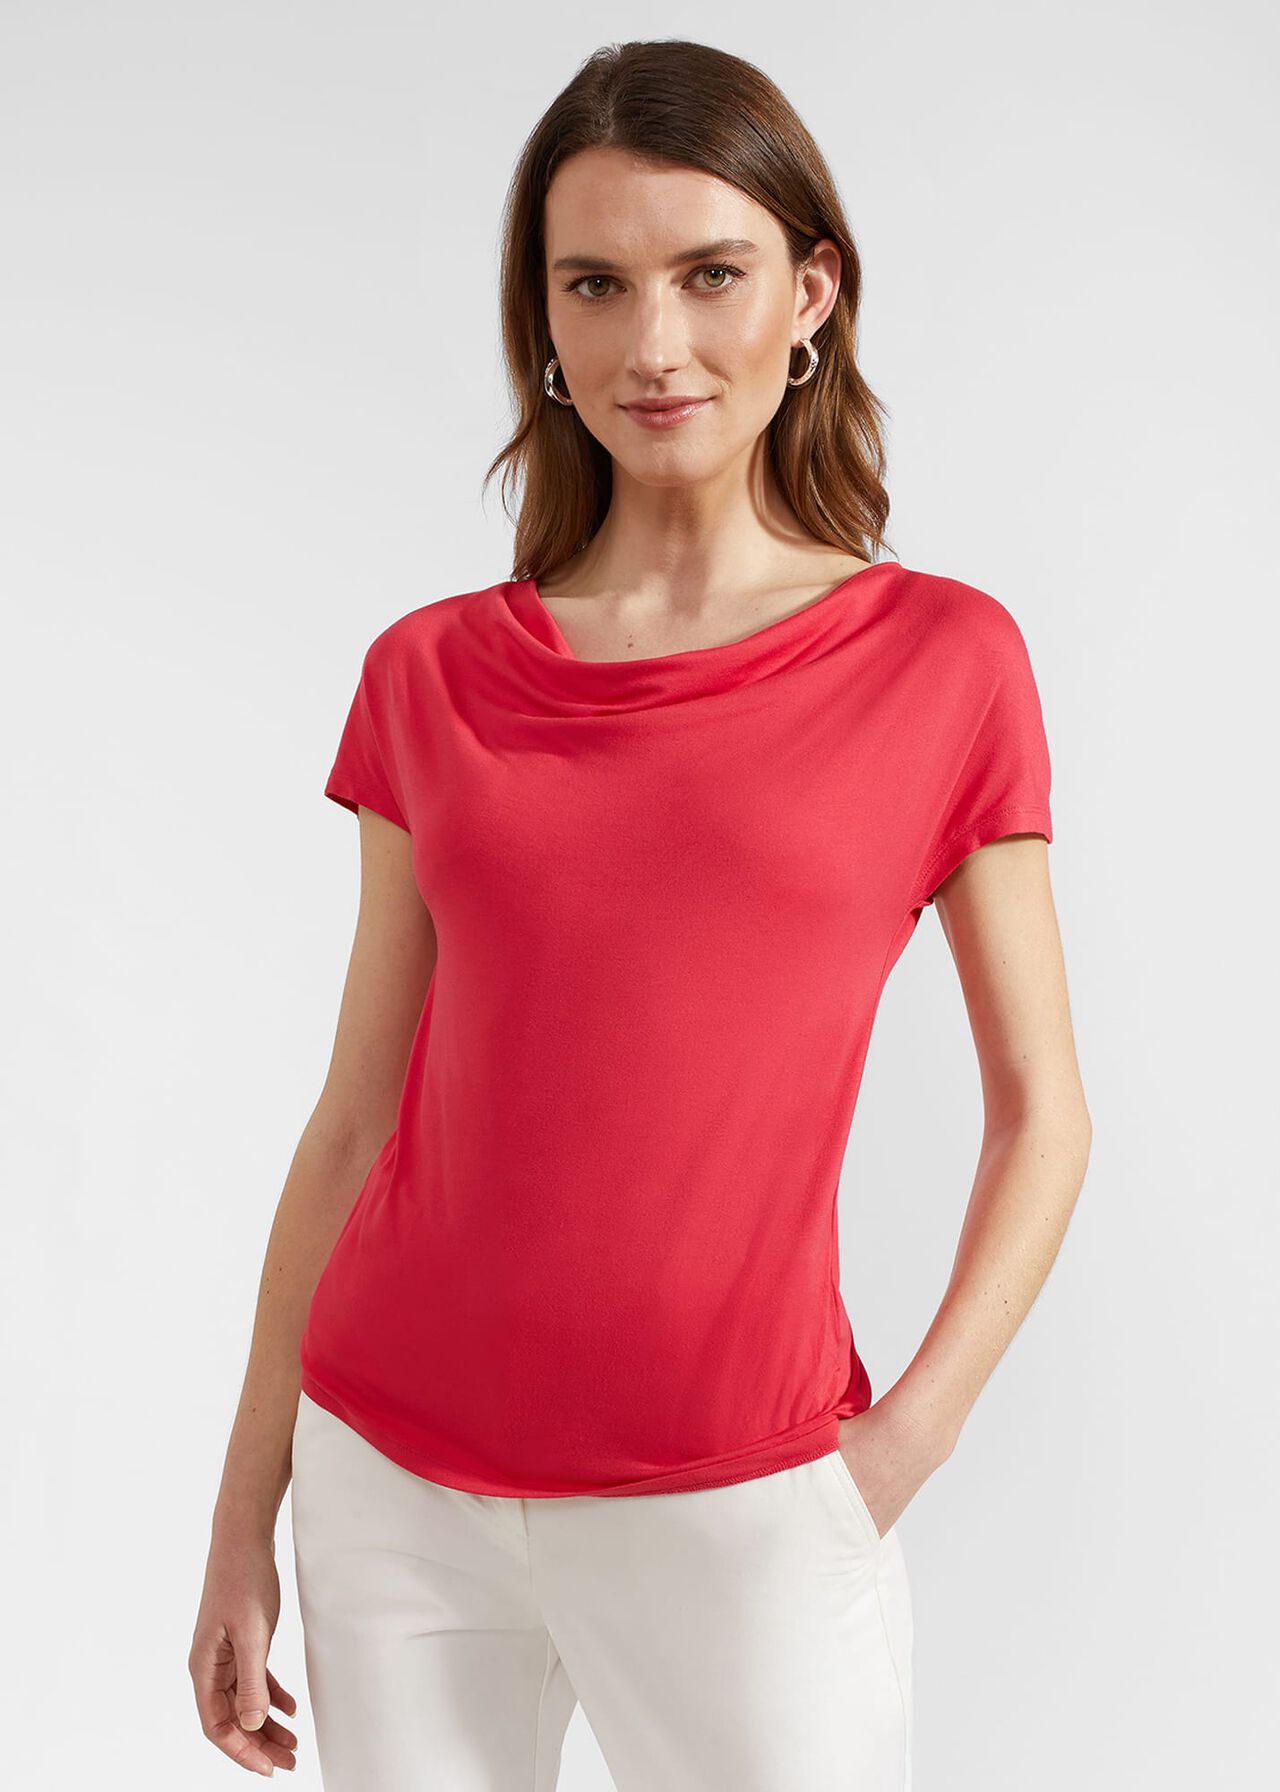 Cathy Cowl Neck Top, Rouge Pink, hi-res